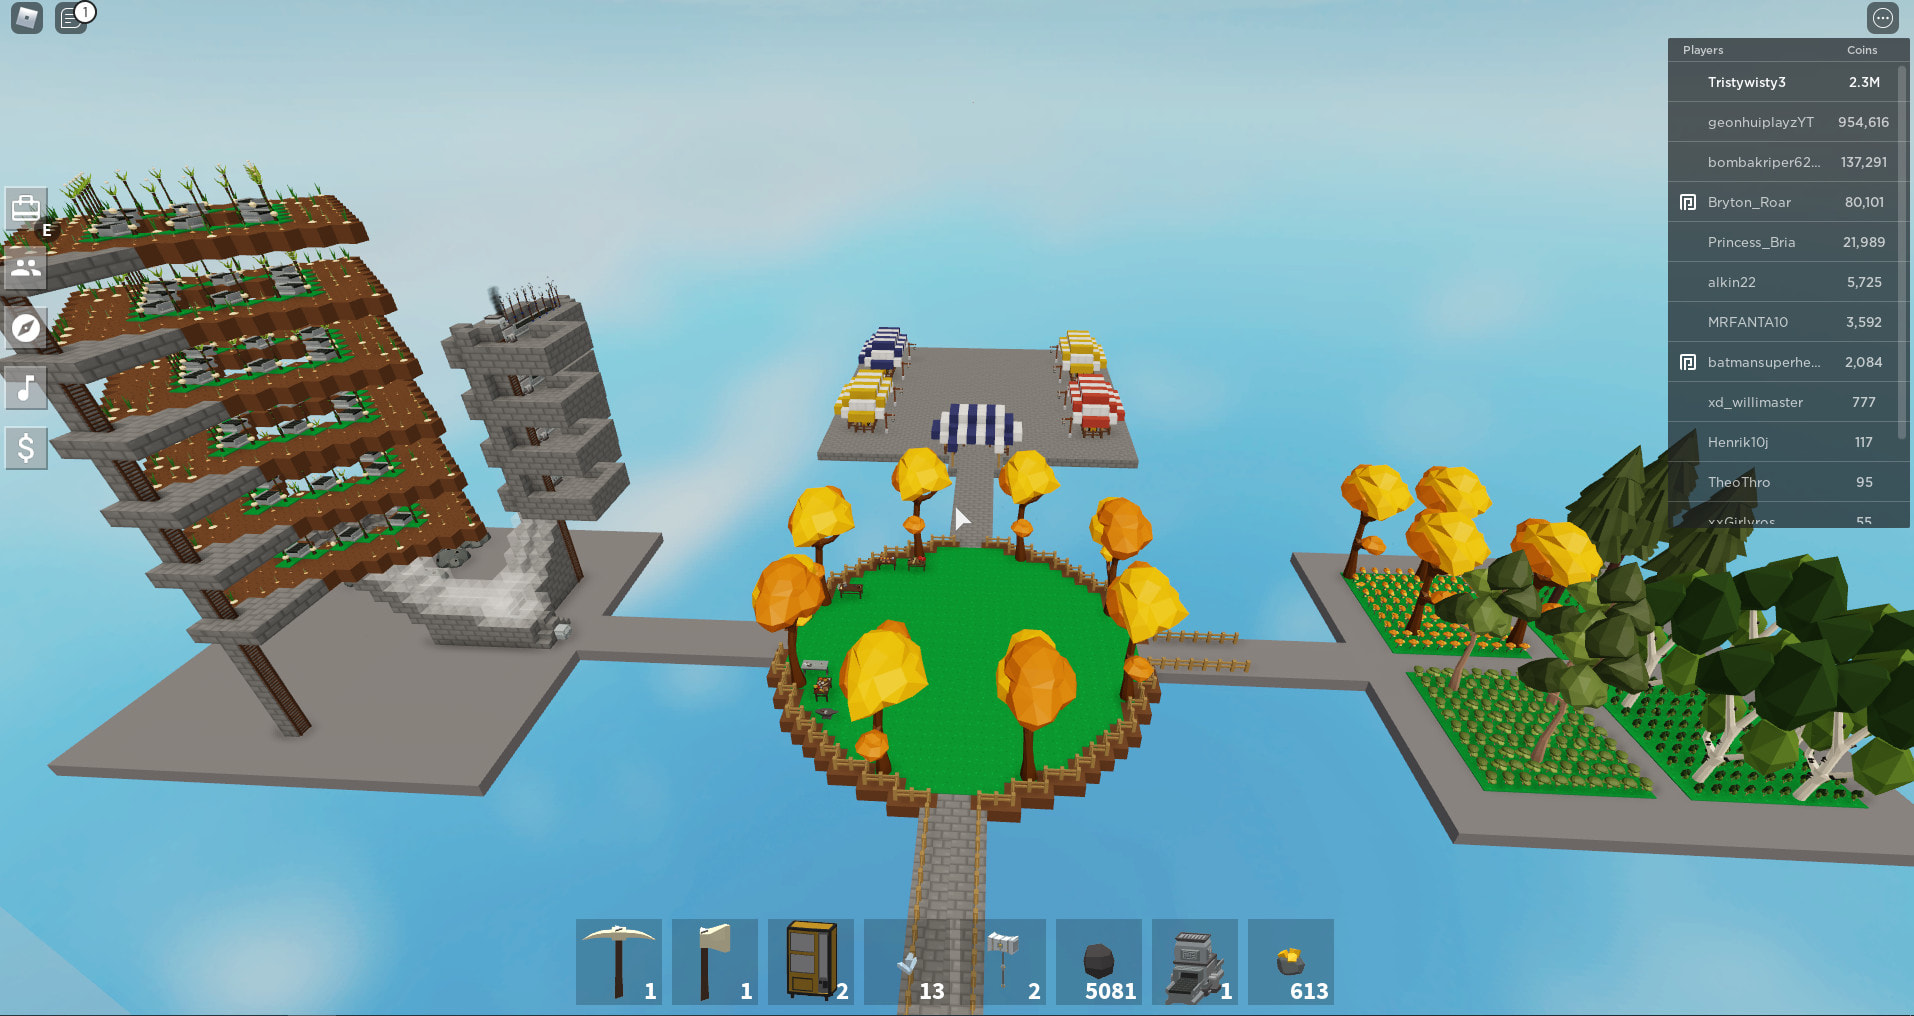 Make You An Auto Onoin Farm In Roblox Skyblock With My Resources